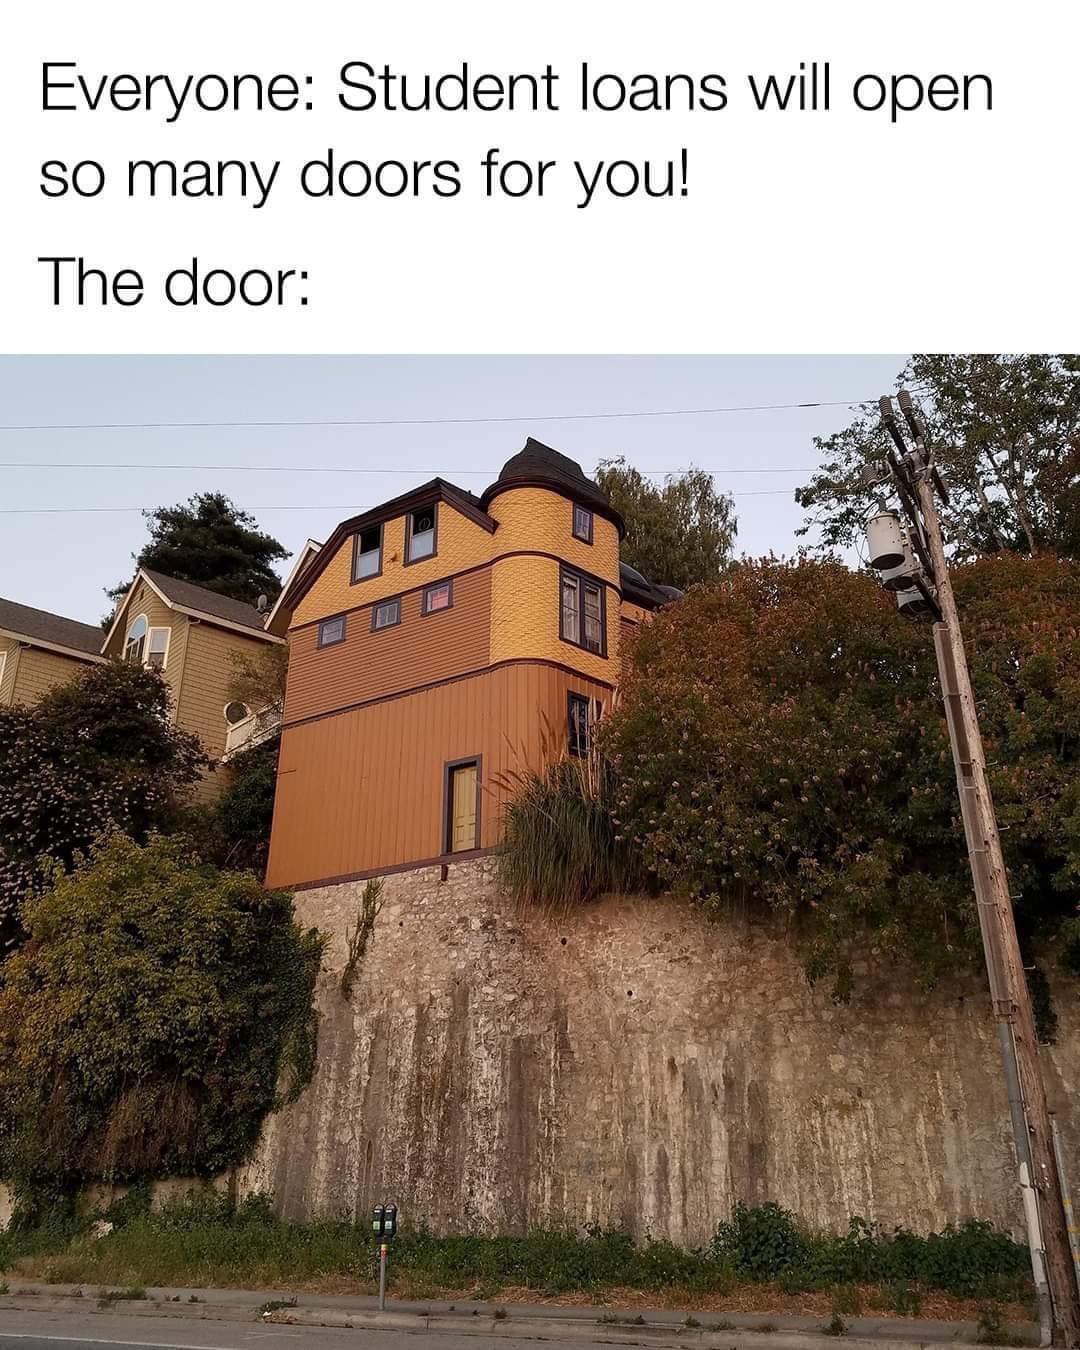 funny memes - architecture fails - Everyone Student loans will open so many doors for you! The door